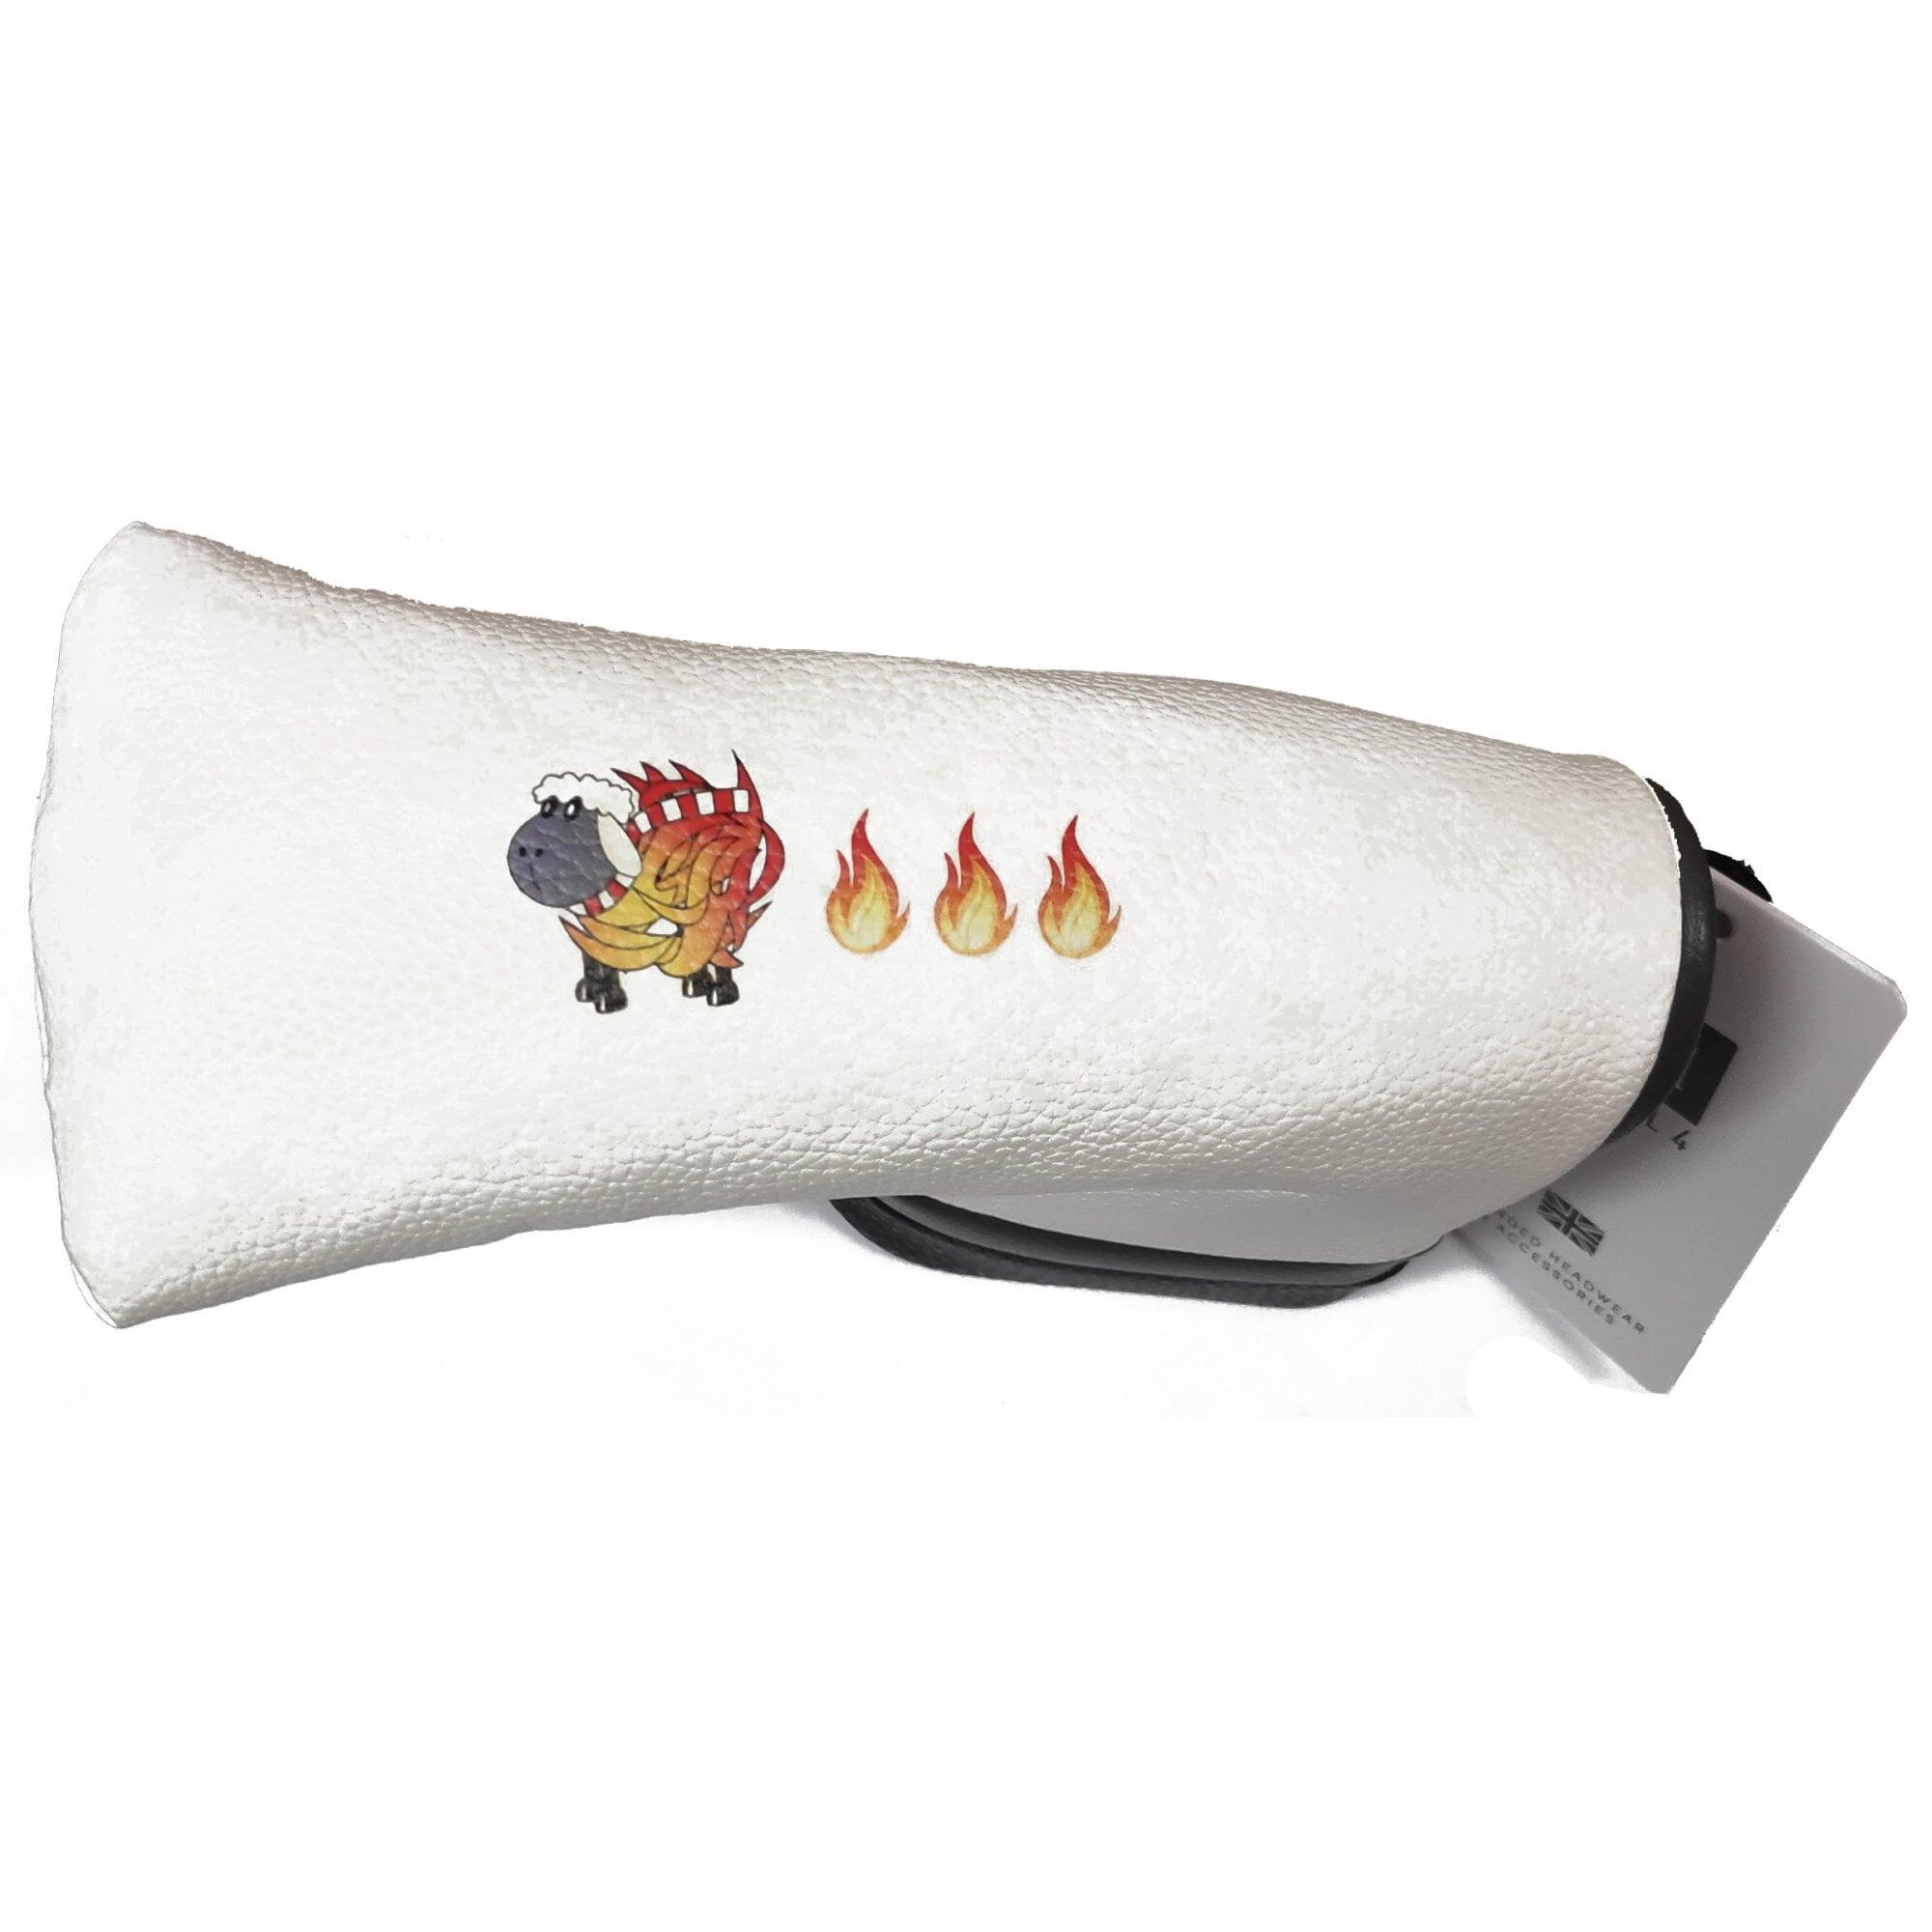 MASTERS GOLF Logo Sheep On Fire Blade Putter Cover - Black/Grey/White